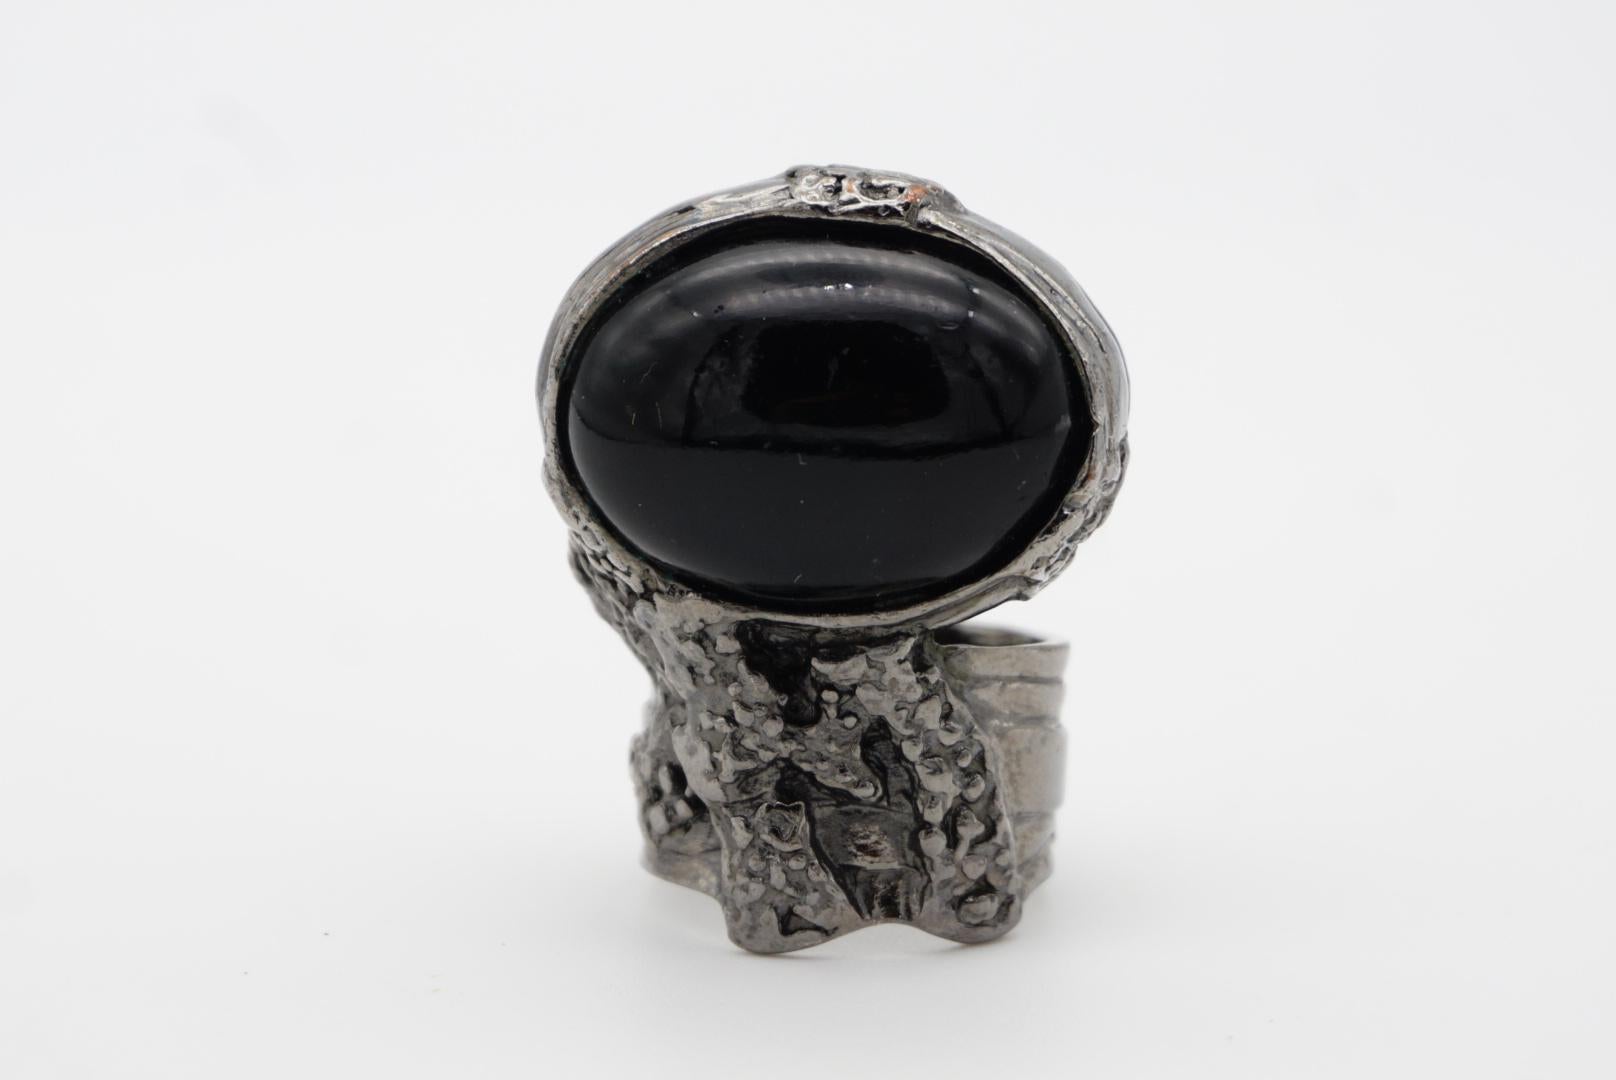 Yves Saint Laurent YSL Arty Black Cabochon Statement Chunky Silver Ring, Size 8 1